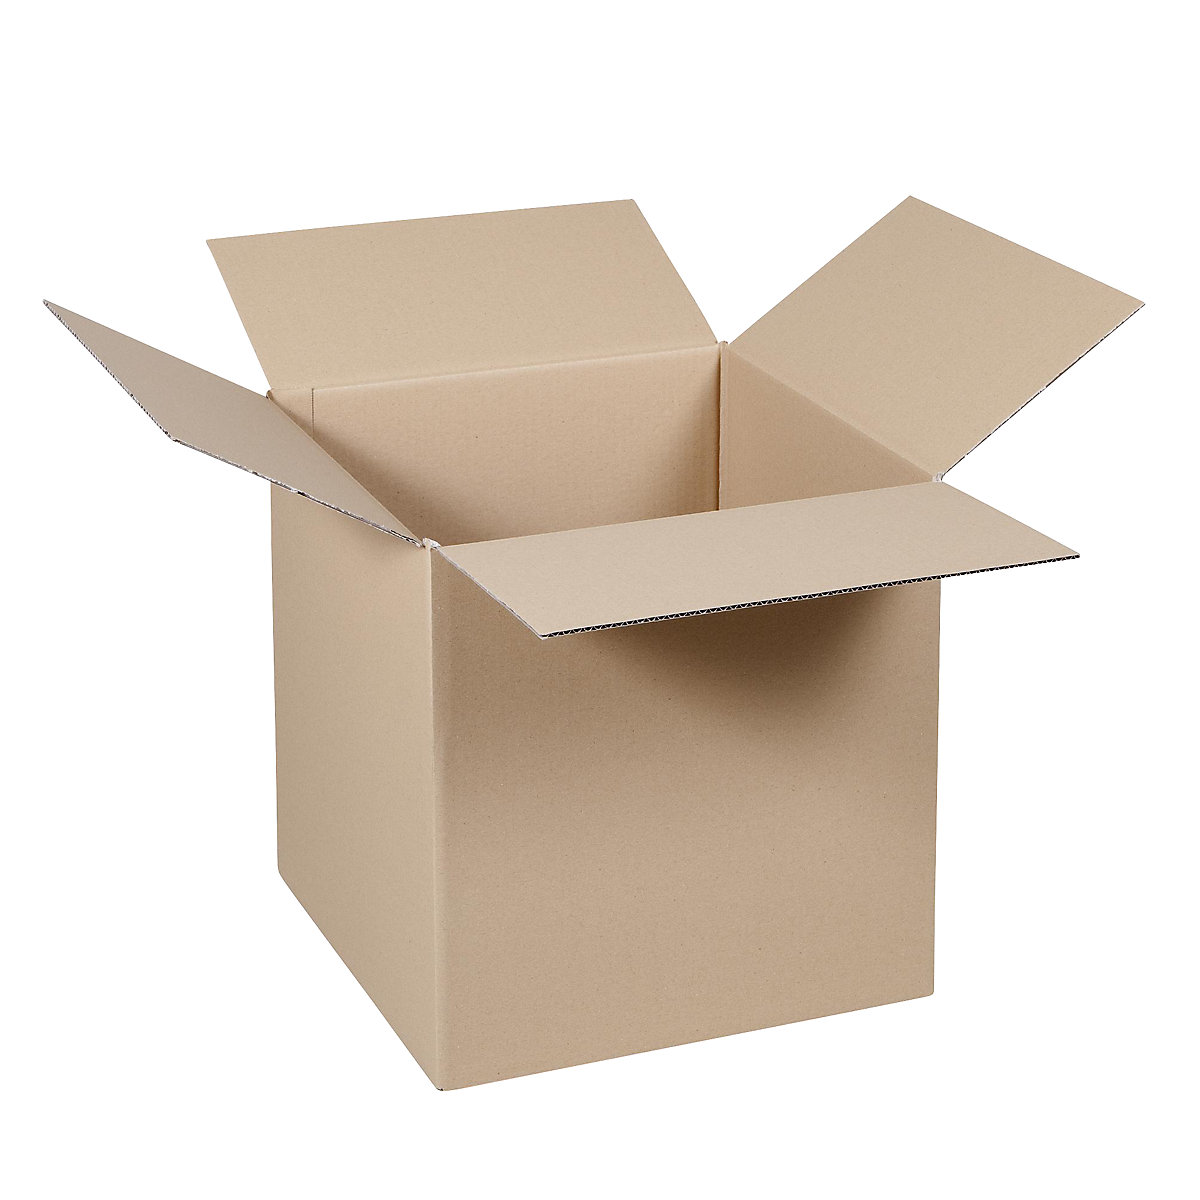 Folding cardboard box, FEFCO 0201, made of double fluted cardboard, internal dimensions 250 x 250 x 250 mm, pack of 50-48